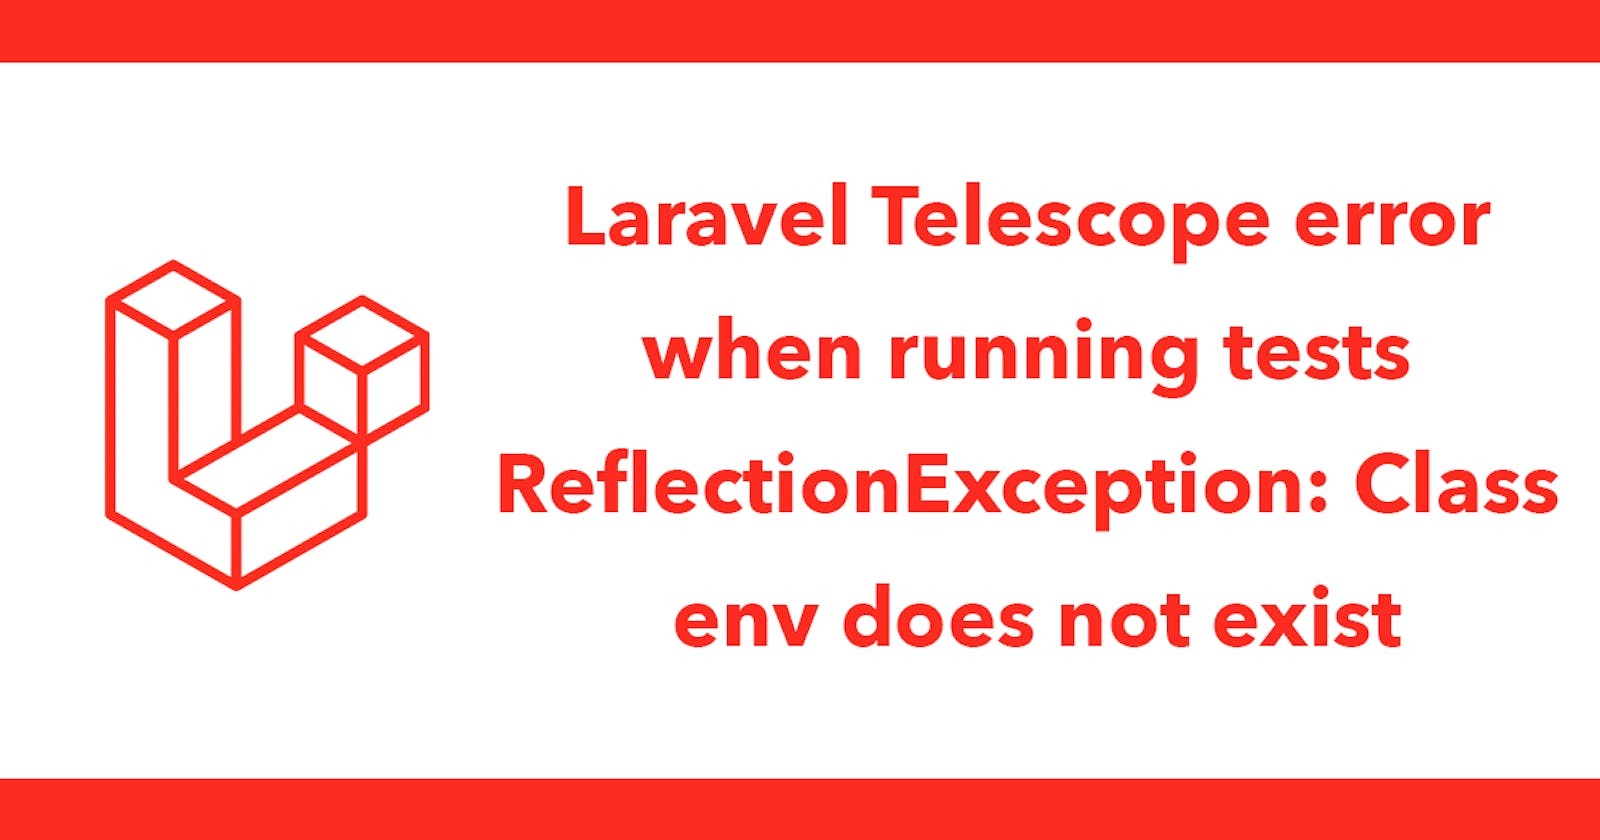 Laravel Telescope error when running tests ReflectionException: Class env does not exist